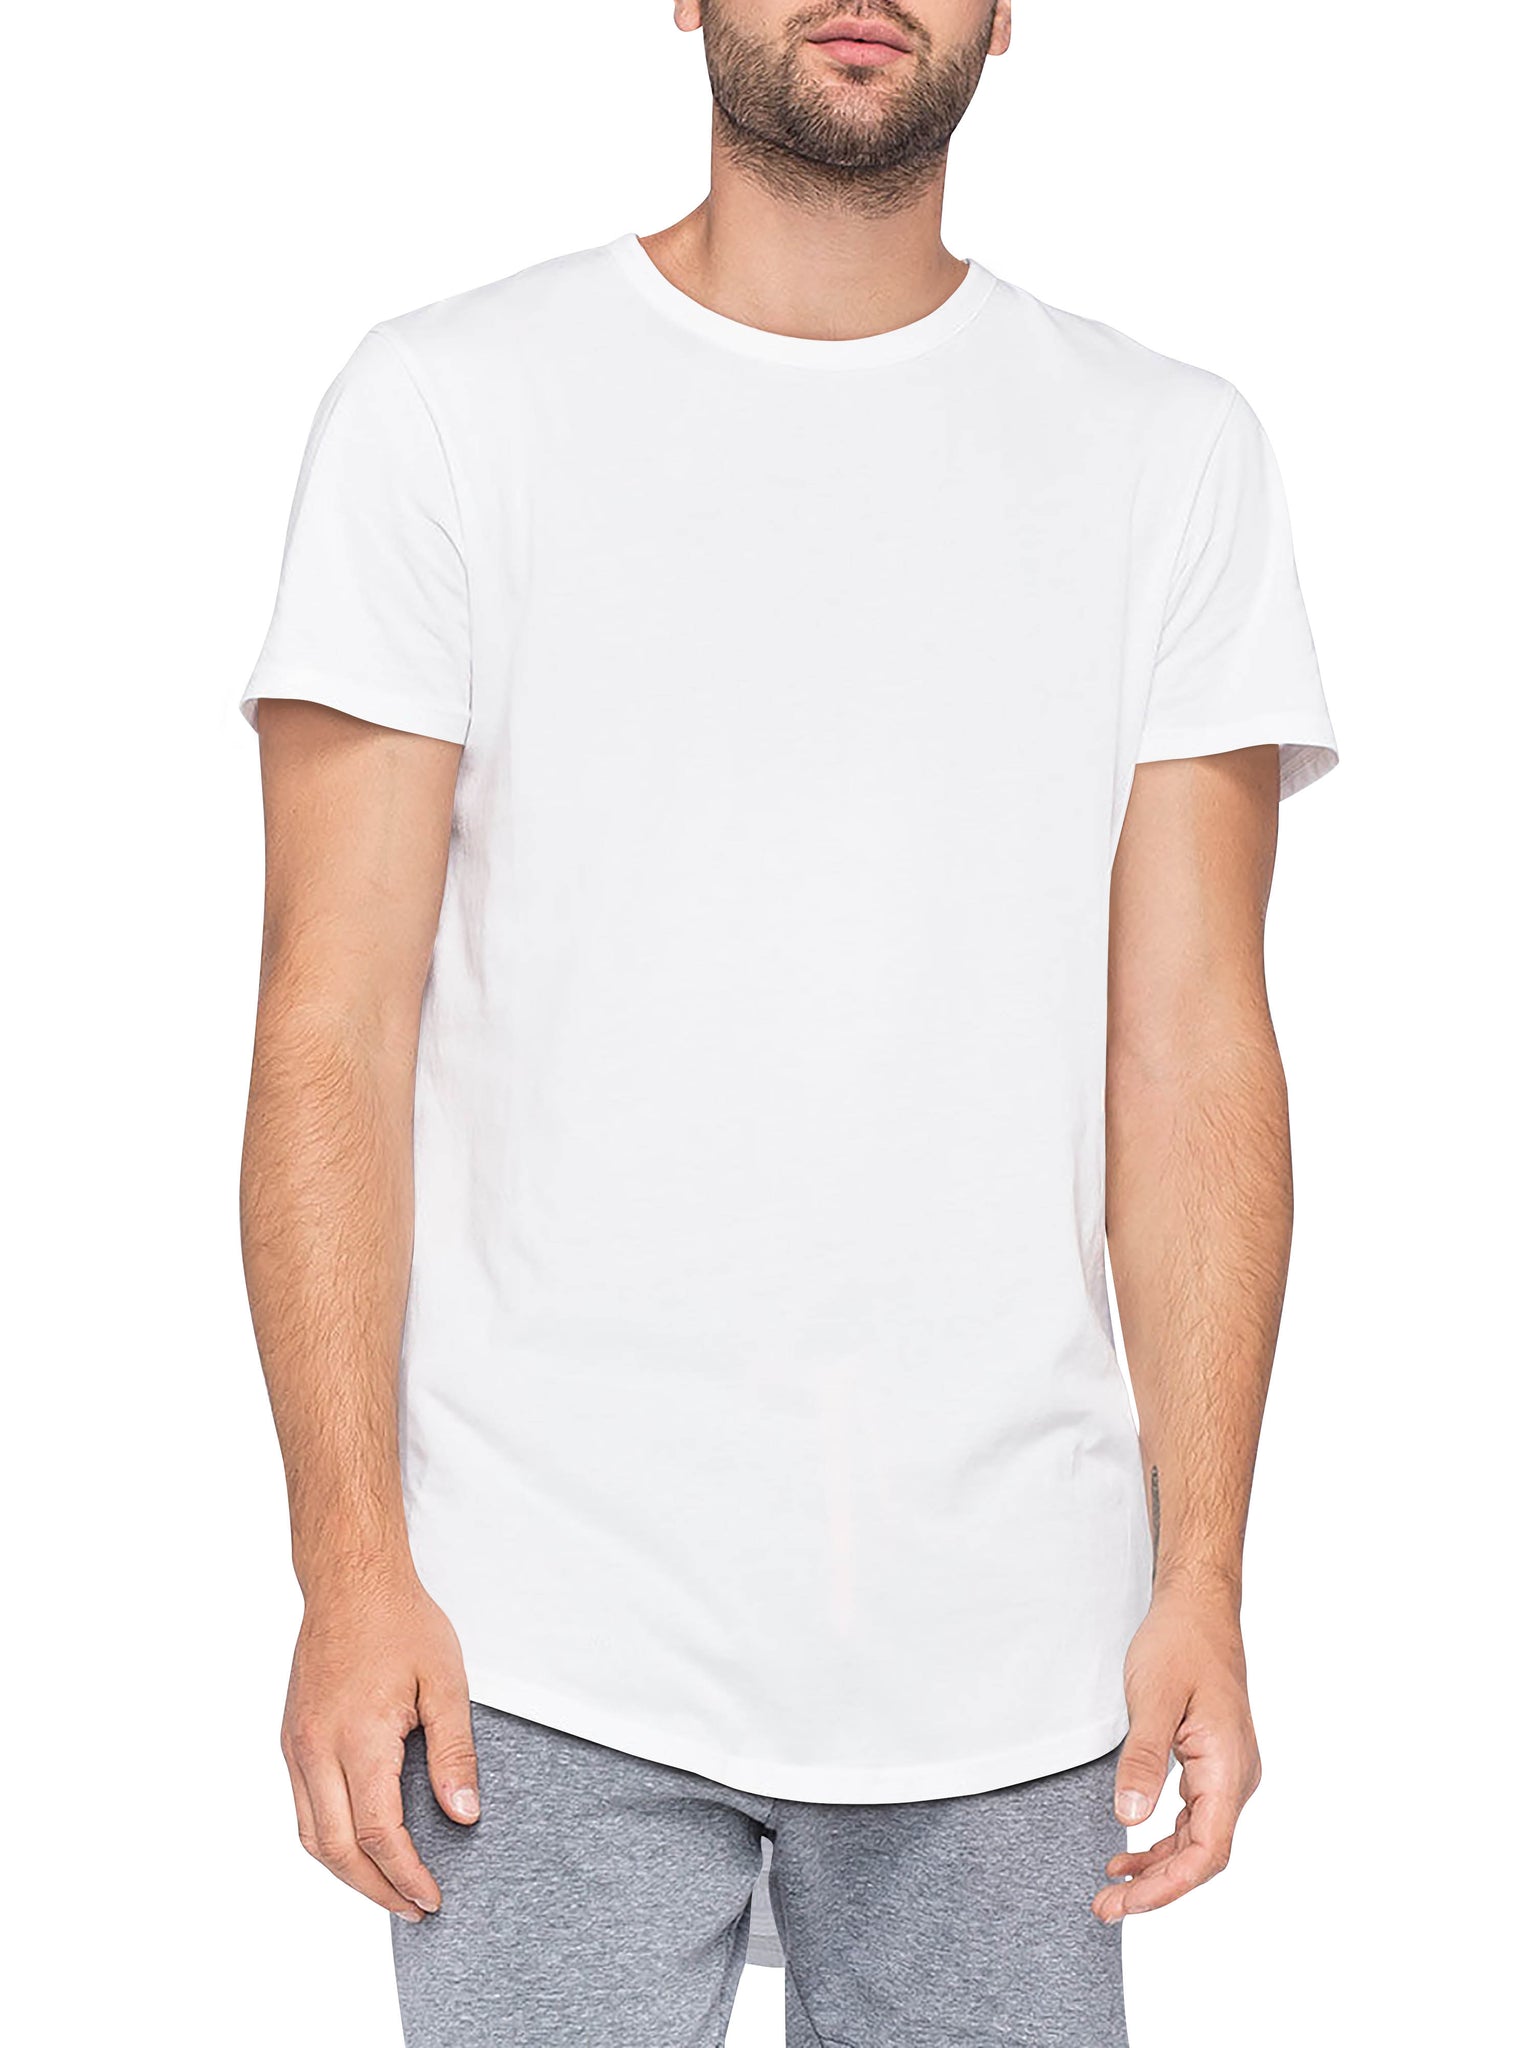 Mens Premium Hipster Longline T Shirts with Side Zipper - T-Shirt